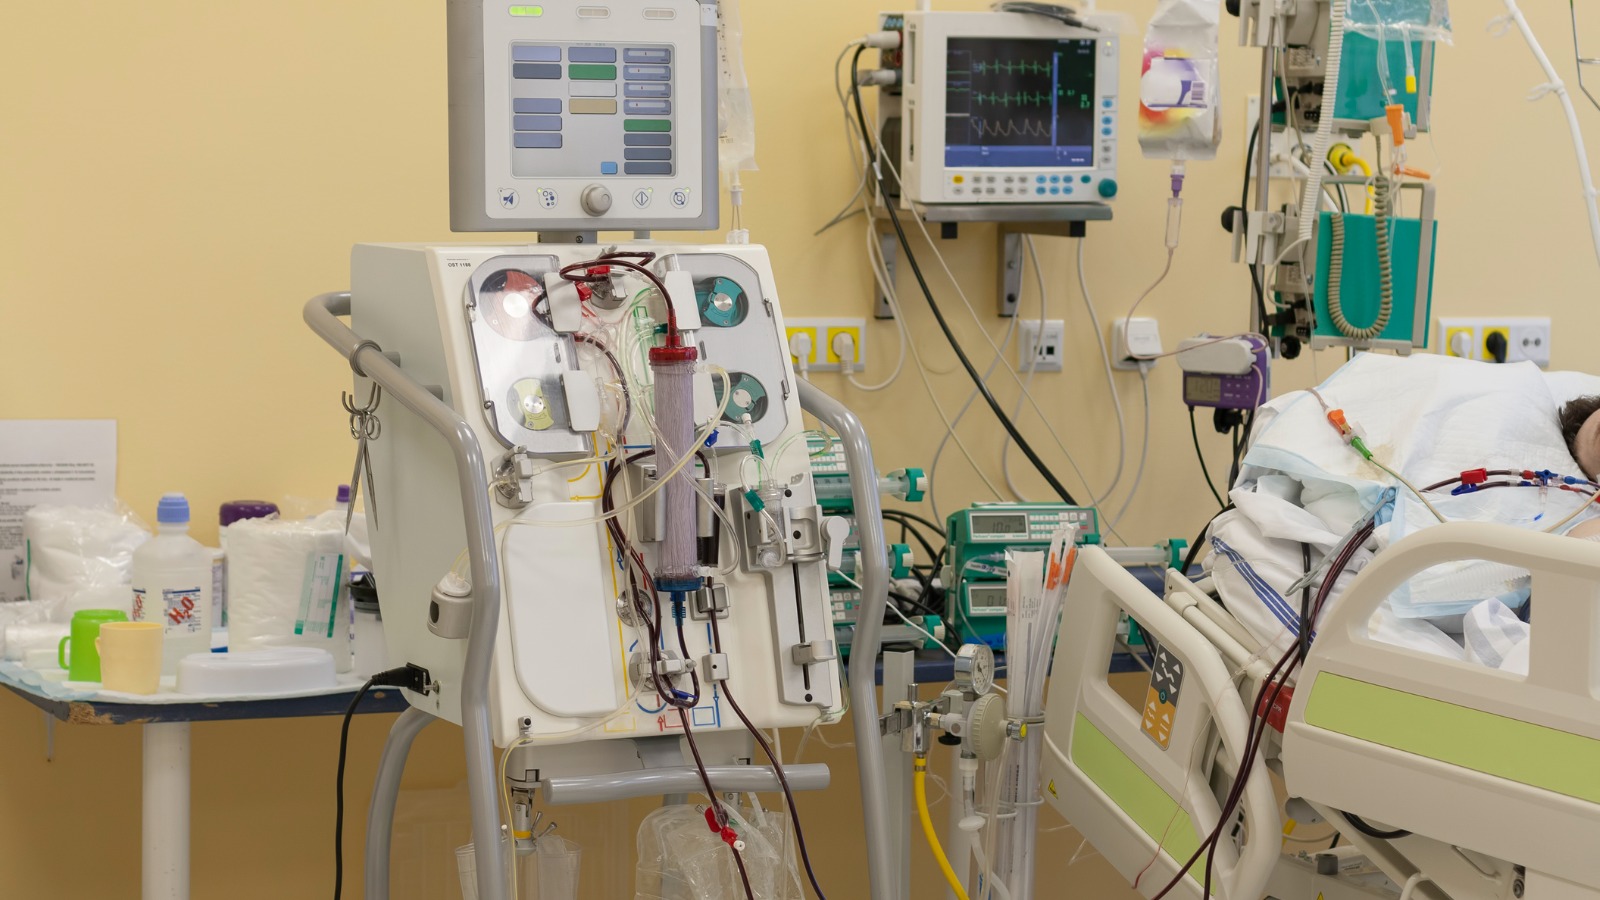 Incorrect dialysate canister mix-up during hemodialysis therapy